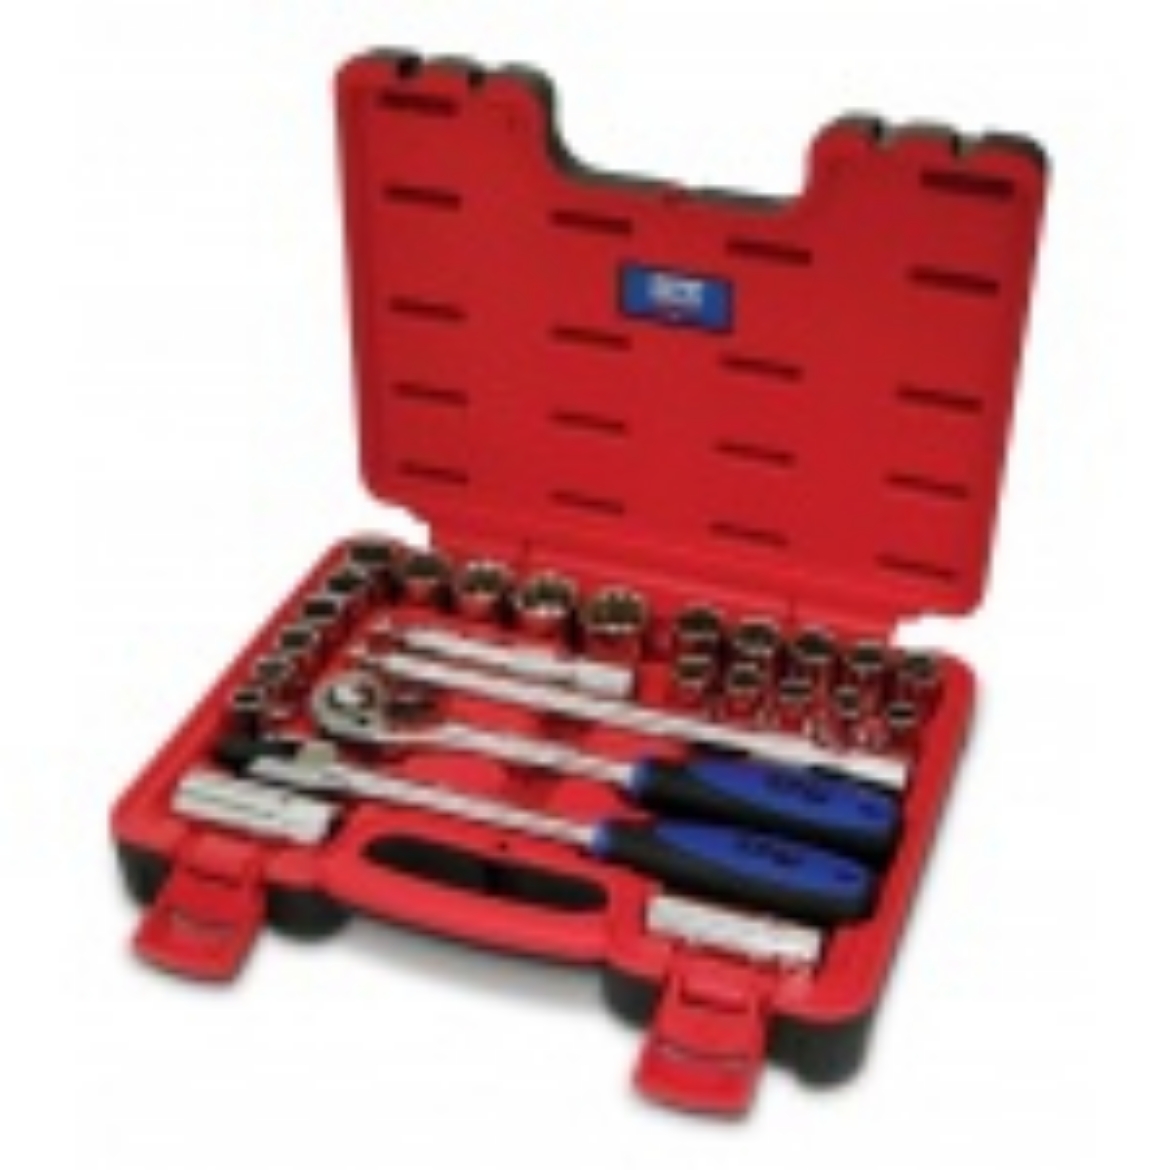 Picture of SOCKET SET 1/2DR 12PT 26PC METRIC/SAE IN X-CASE